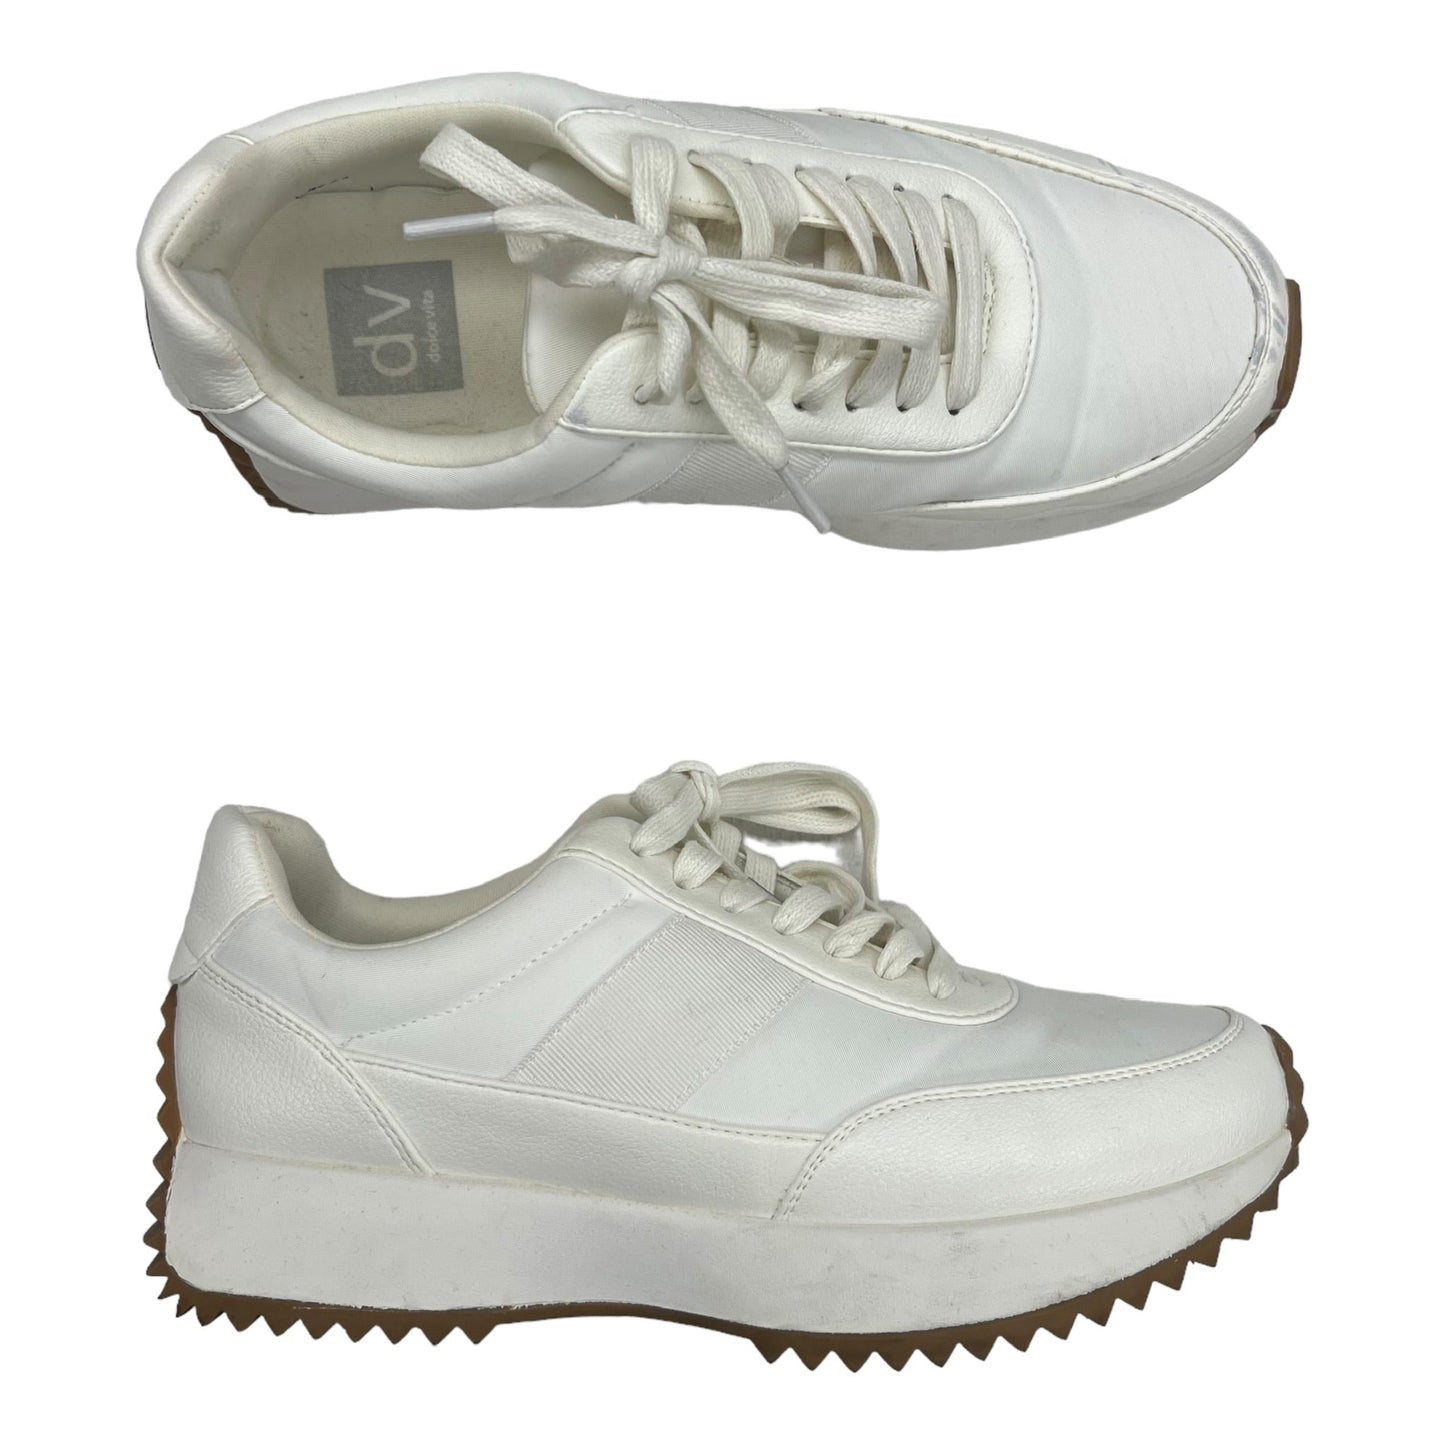 WHITE DOLCE VITA SHOES SNEAKERS, Size 7.5